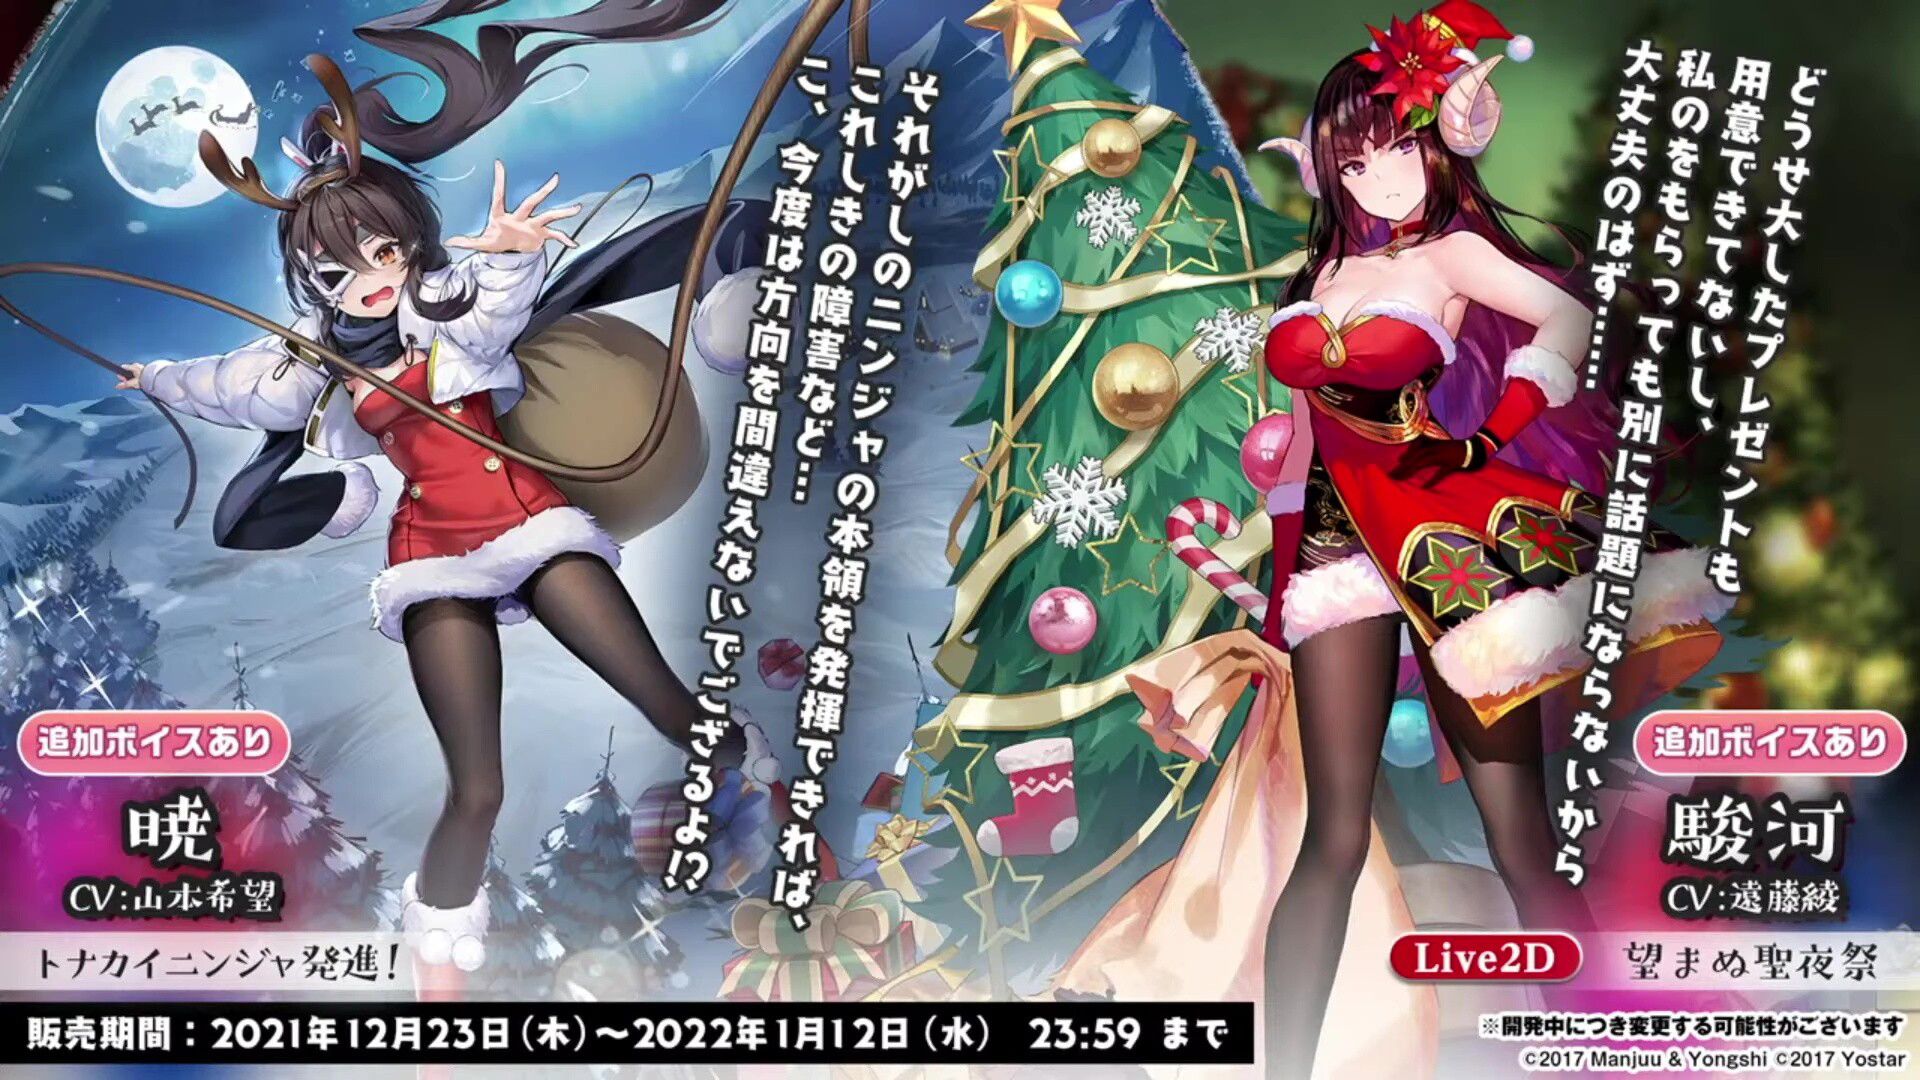 Erotic costumes such as "Azur Lane" erotic new character, whipmuchiro Santa and whipmuchi erotic maid clothes 14